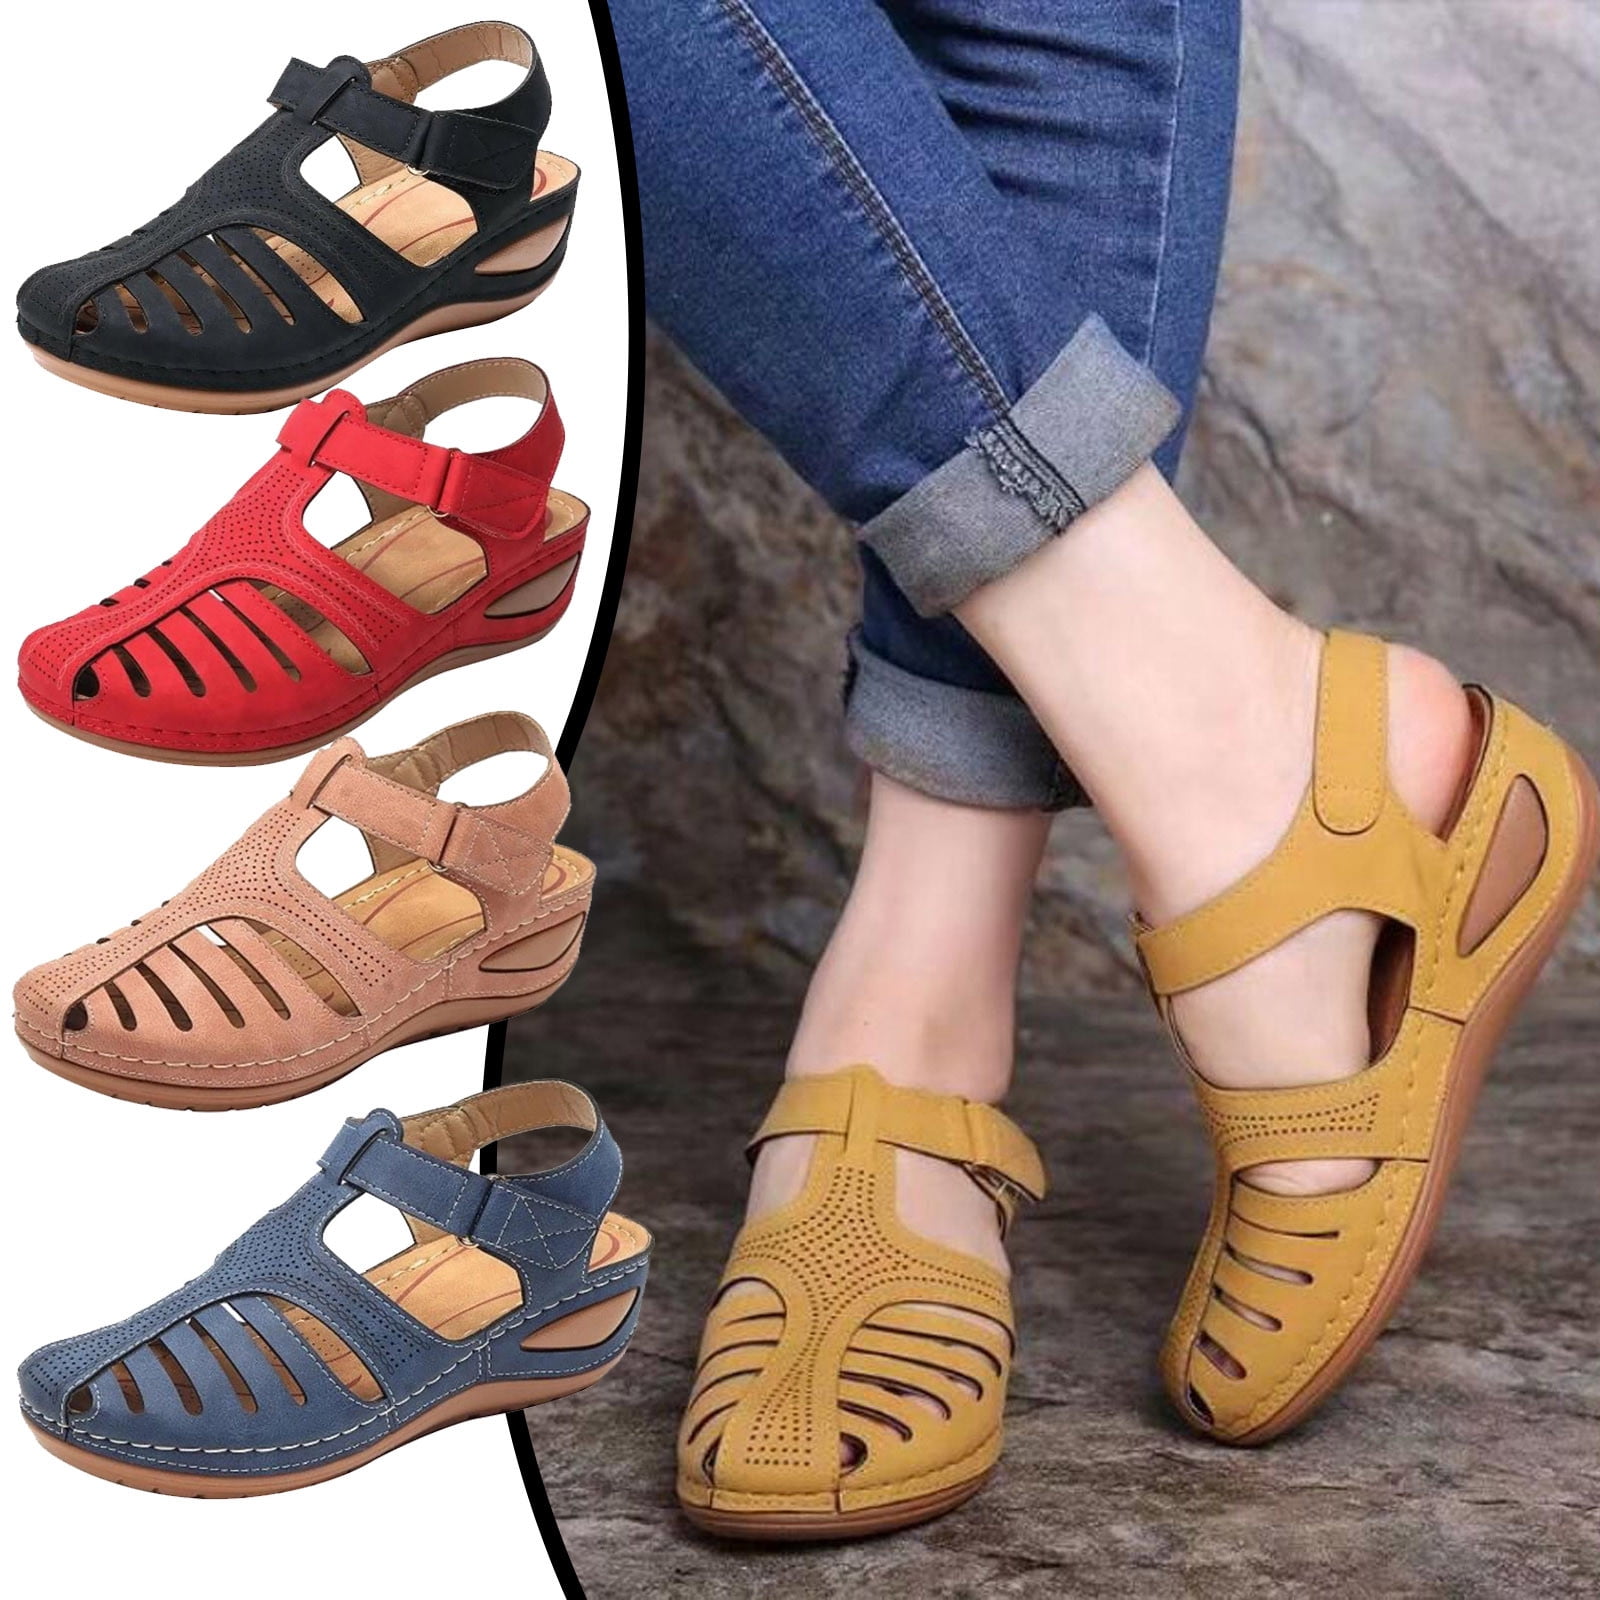 Azrian Soft Leather Closed toe Vintage Anti-Slip Sandals for Women High ...